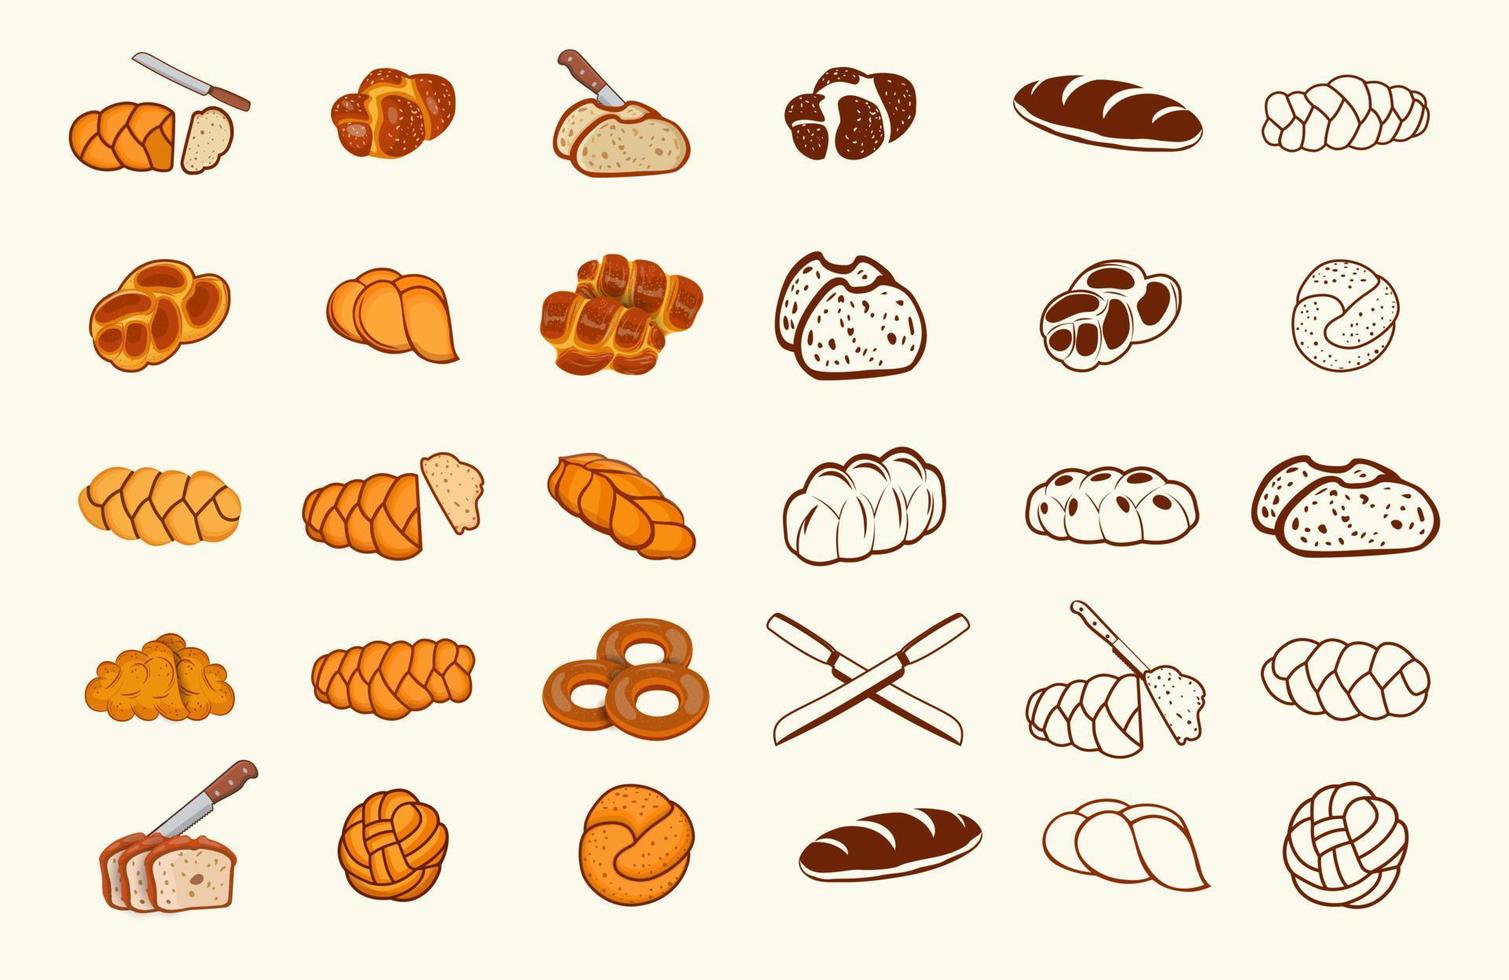 Creative Hi-Quality Challah Braid Food Collections, Sweet Delicious Spice Baguette Bun Sketch Cake Menu Meal Breakfast Free Icon Object Elements, With Premium Vector. vector